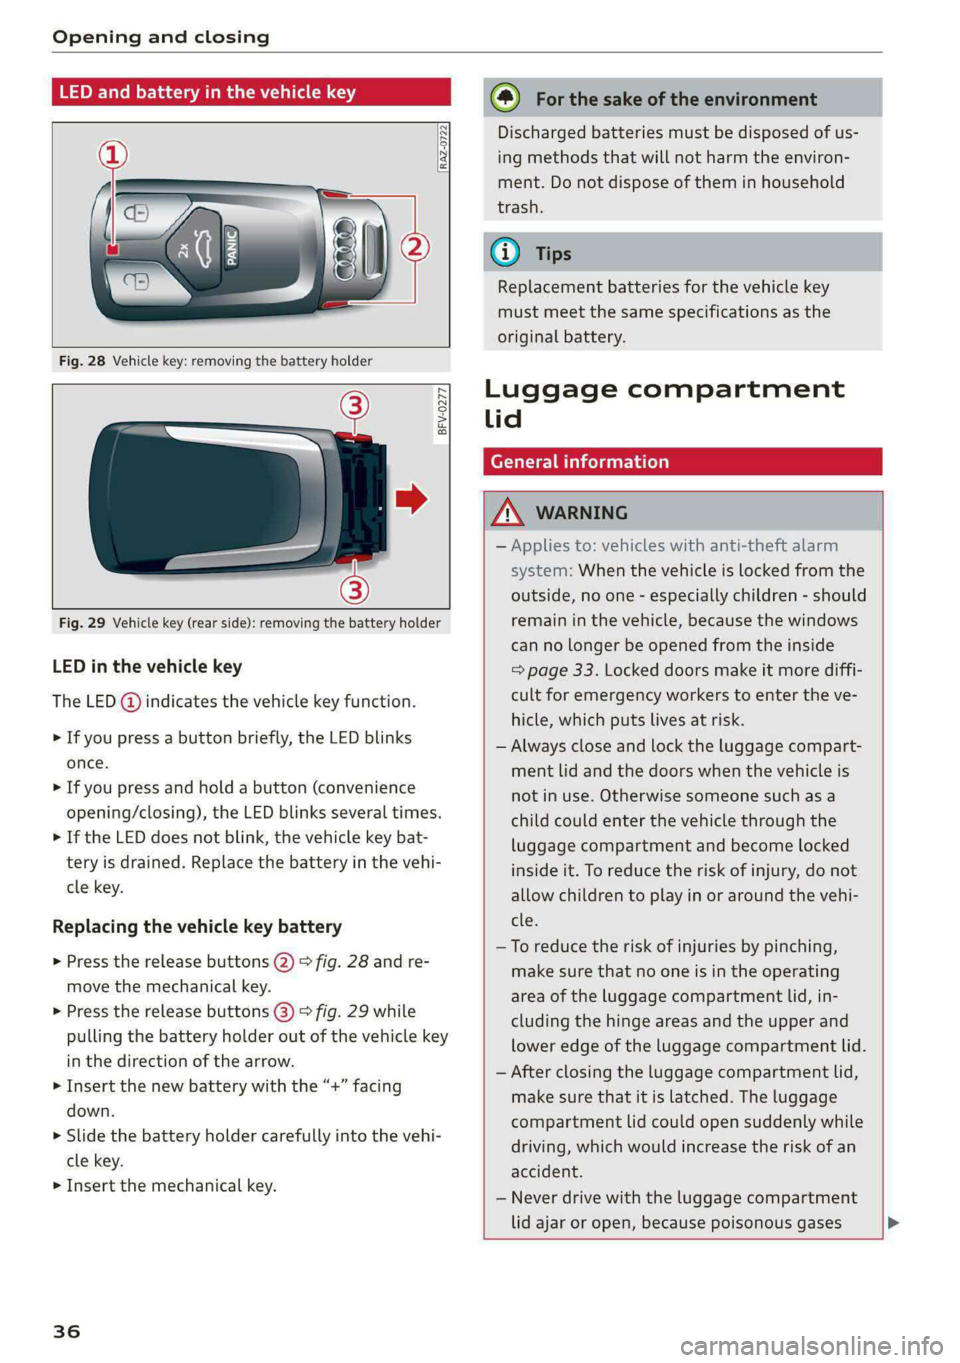 AUDI A4 2020  Owners Manual Opening and closing 
  
  
RAZ-0722 
  
  
  
BFV-0277 
  
      
Fig. 29 Vehicle key (rear side): removing the battery holder 
LED in the vehicle key 
The LED @) indicates the vehicle key function. 
